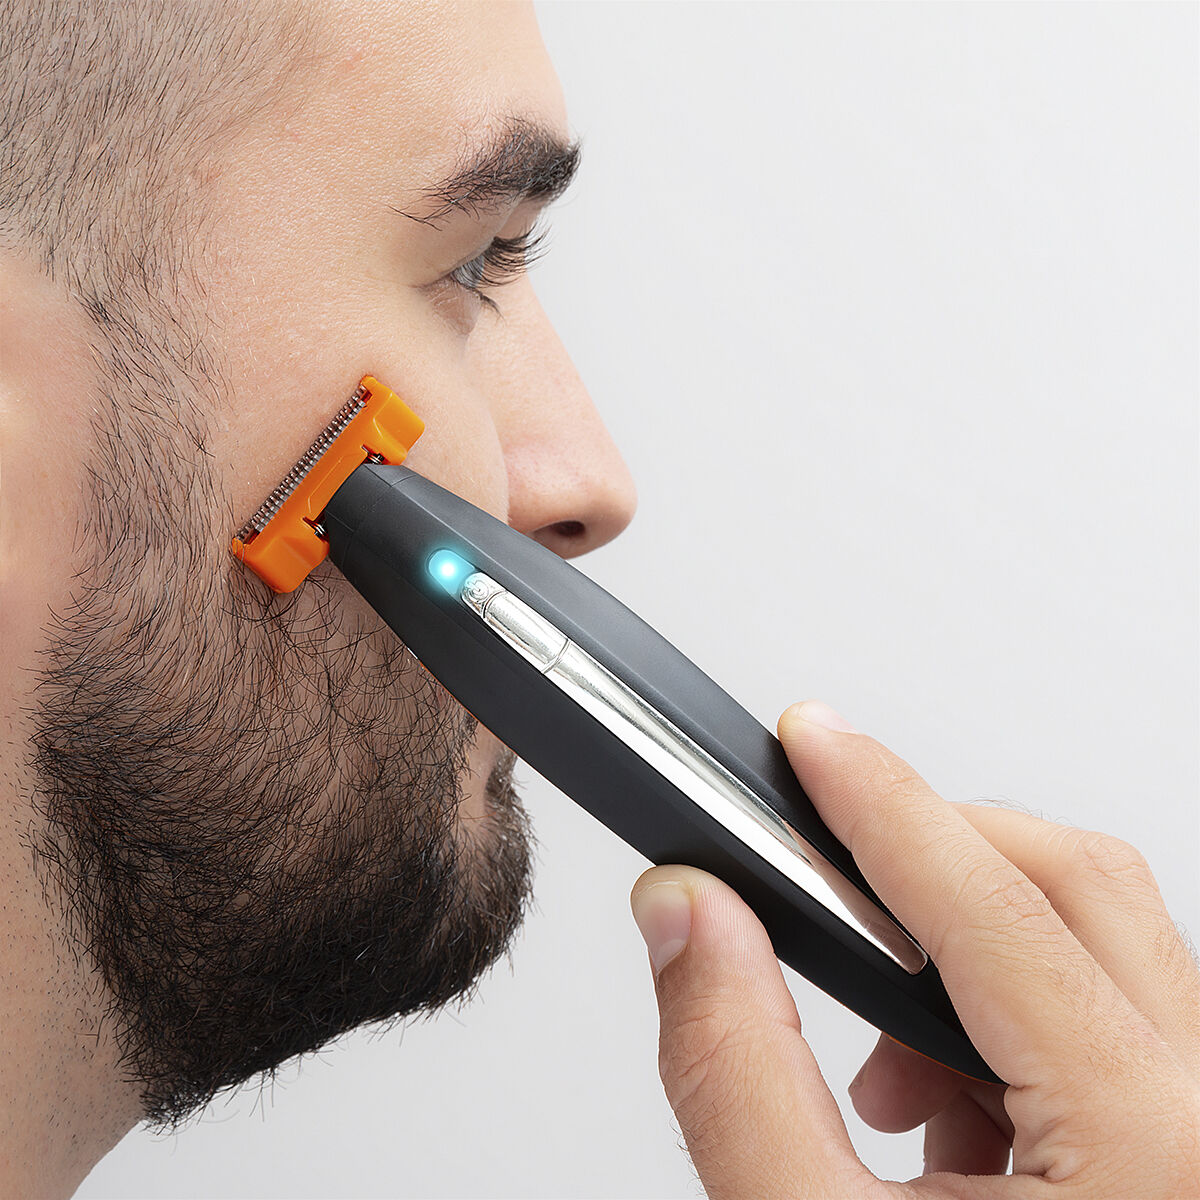 InnovaGoods 3-in-1 Rechargeable Razor